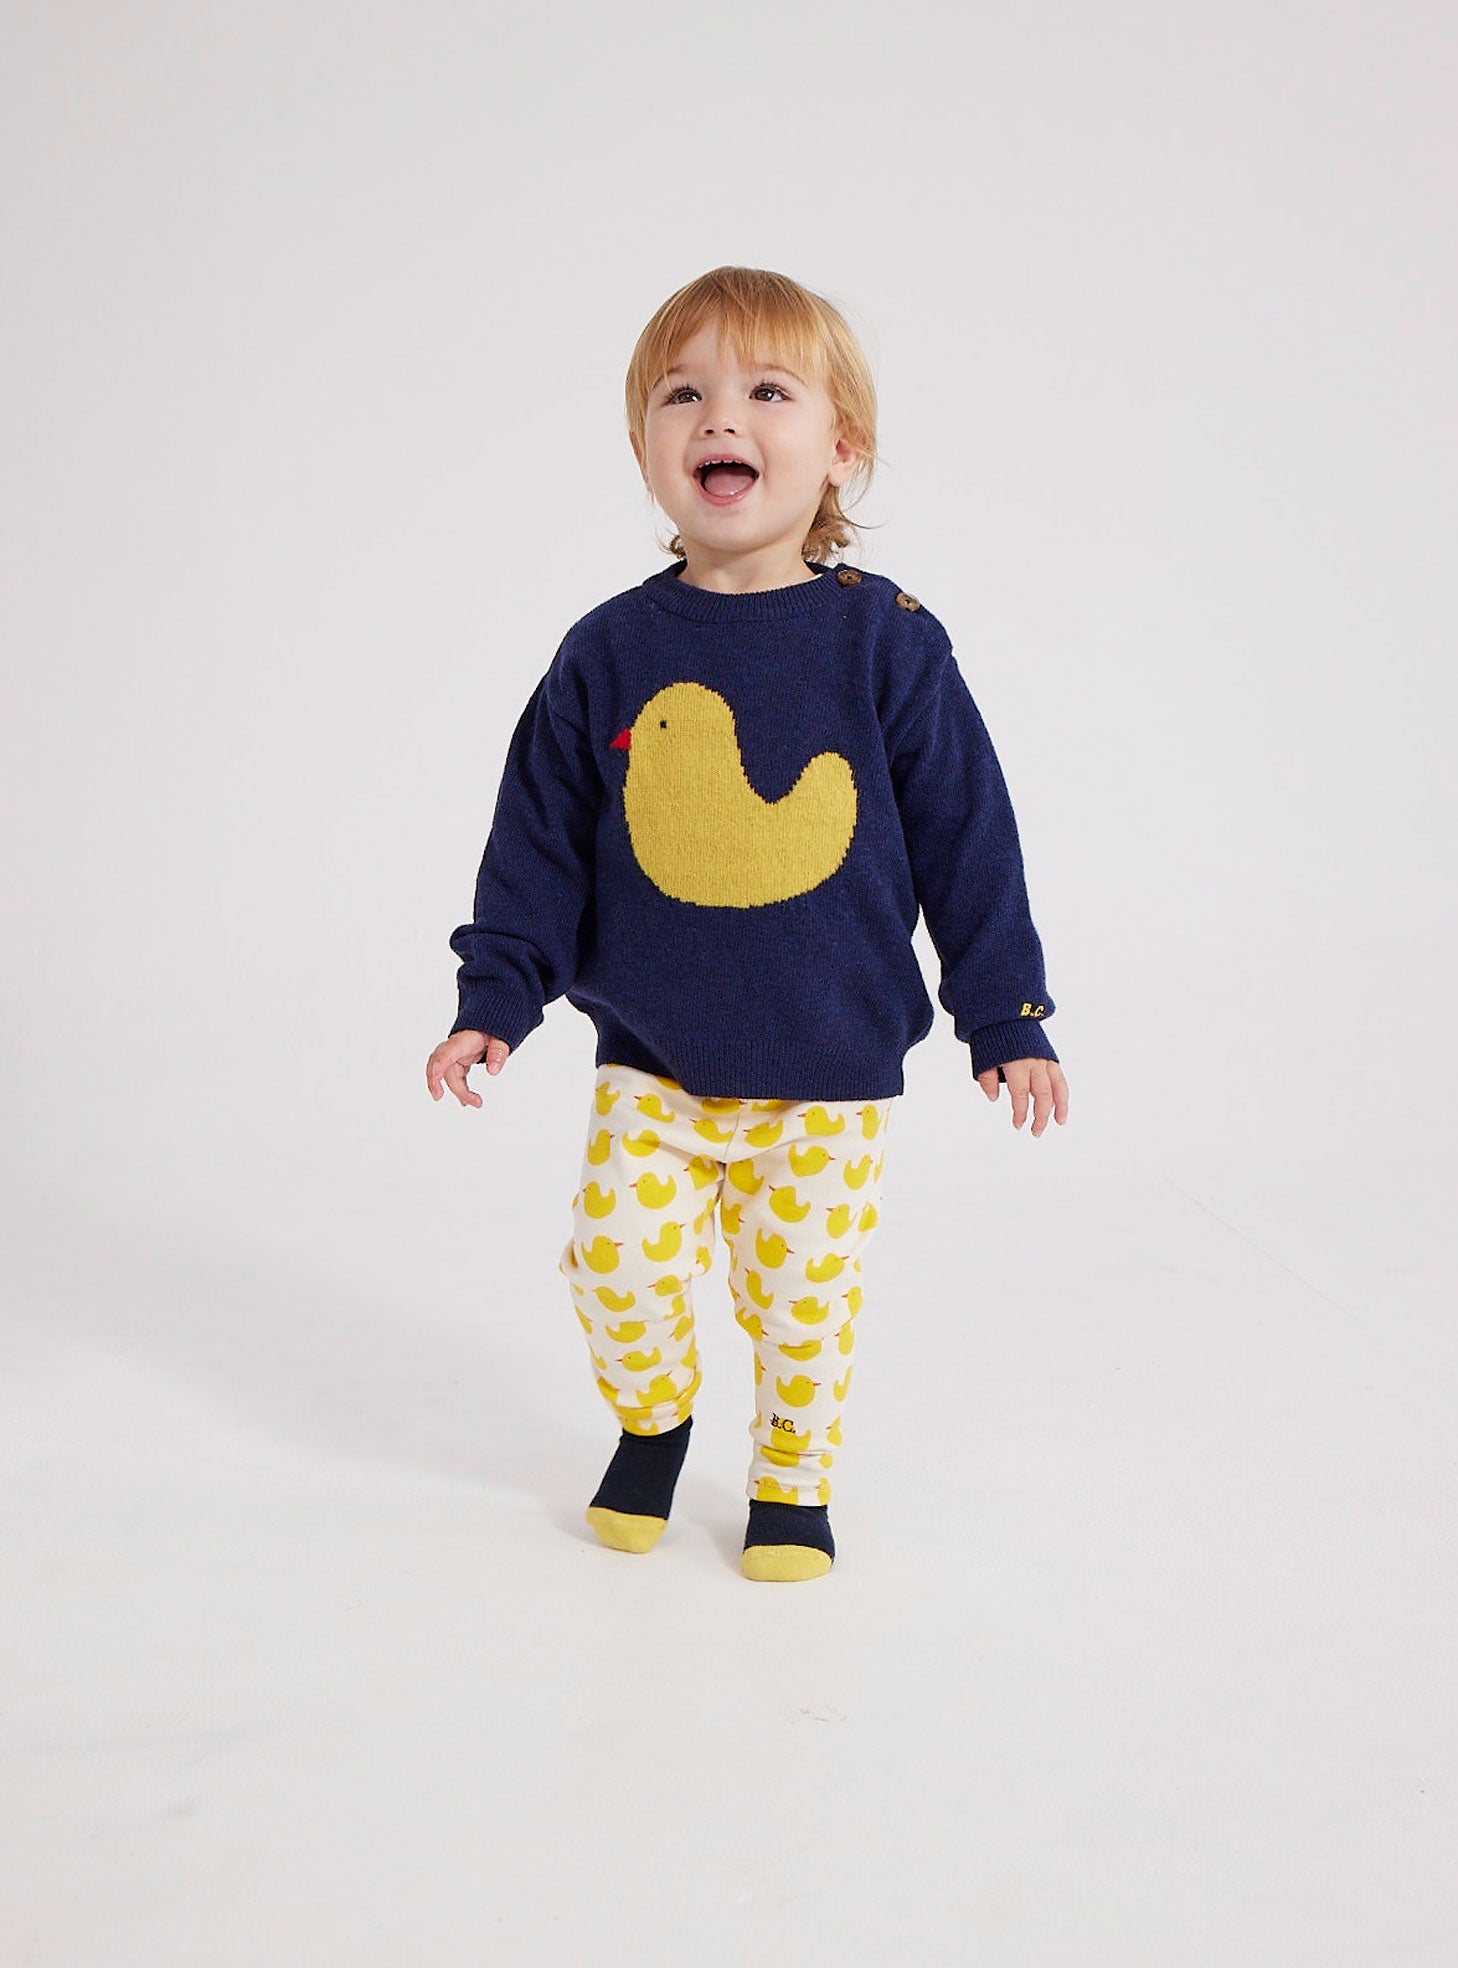 Baby Rubber Duck jumper – Bobo Choses